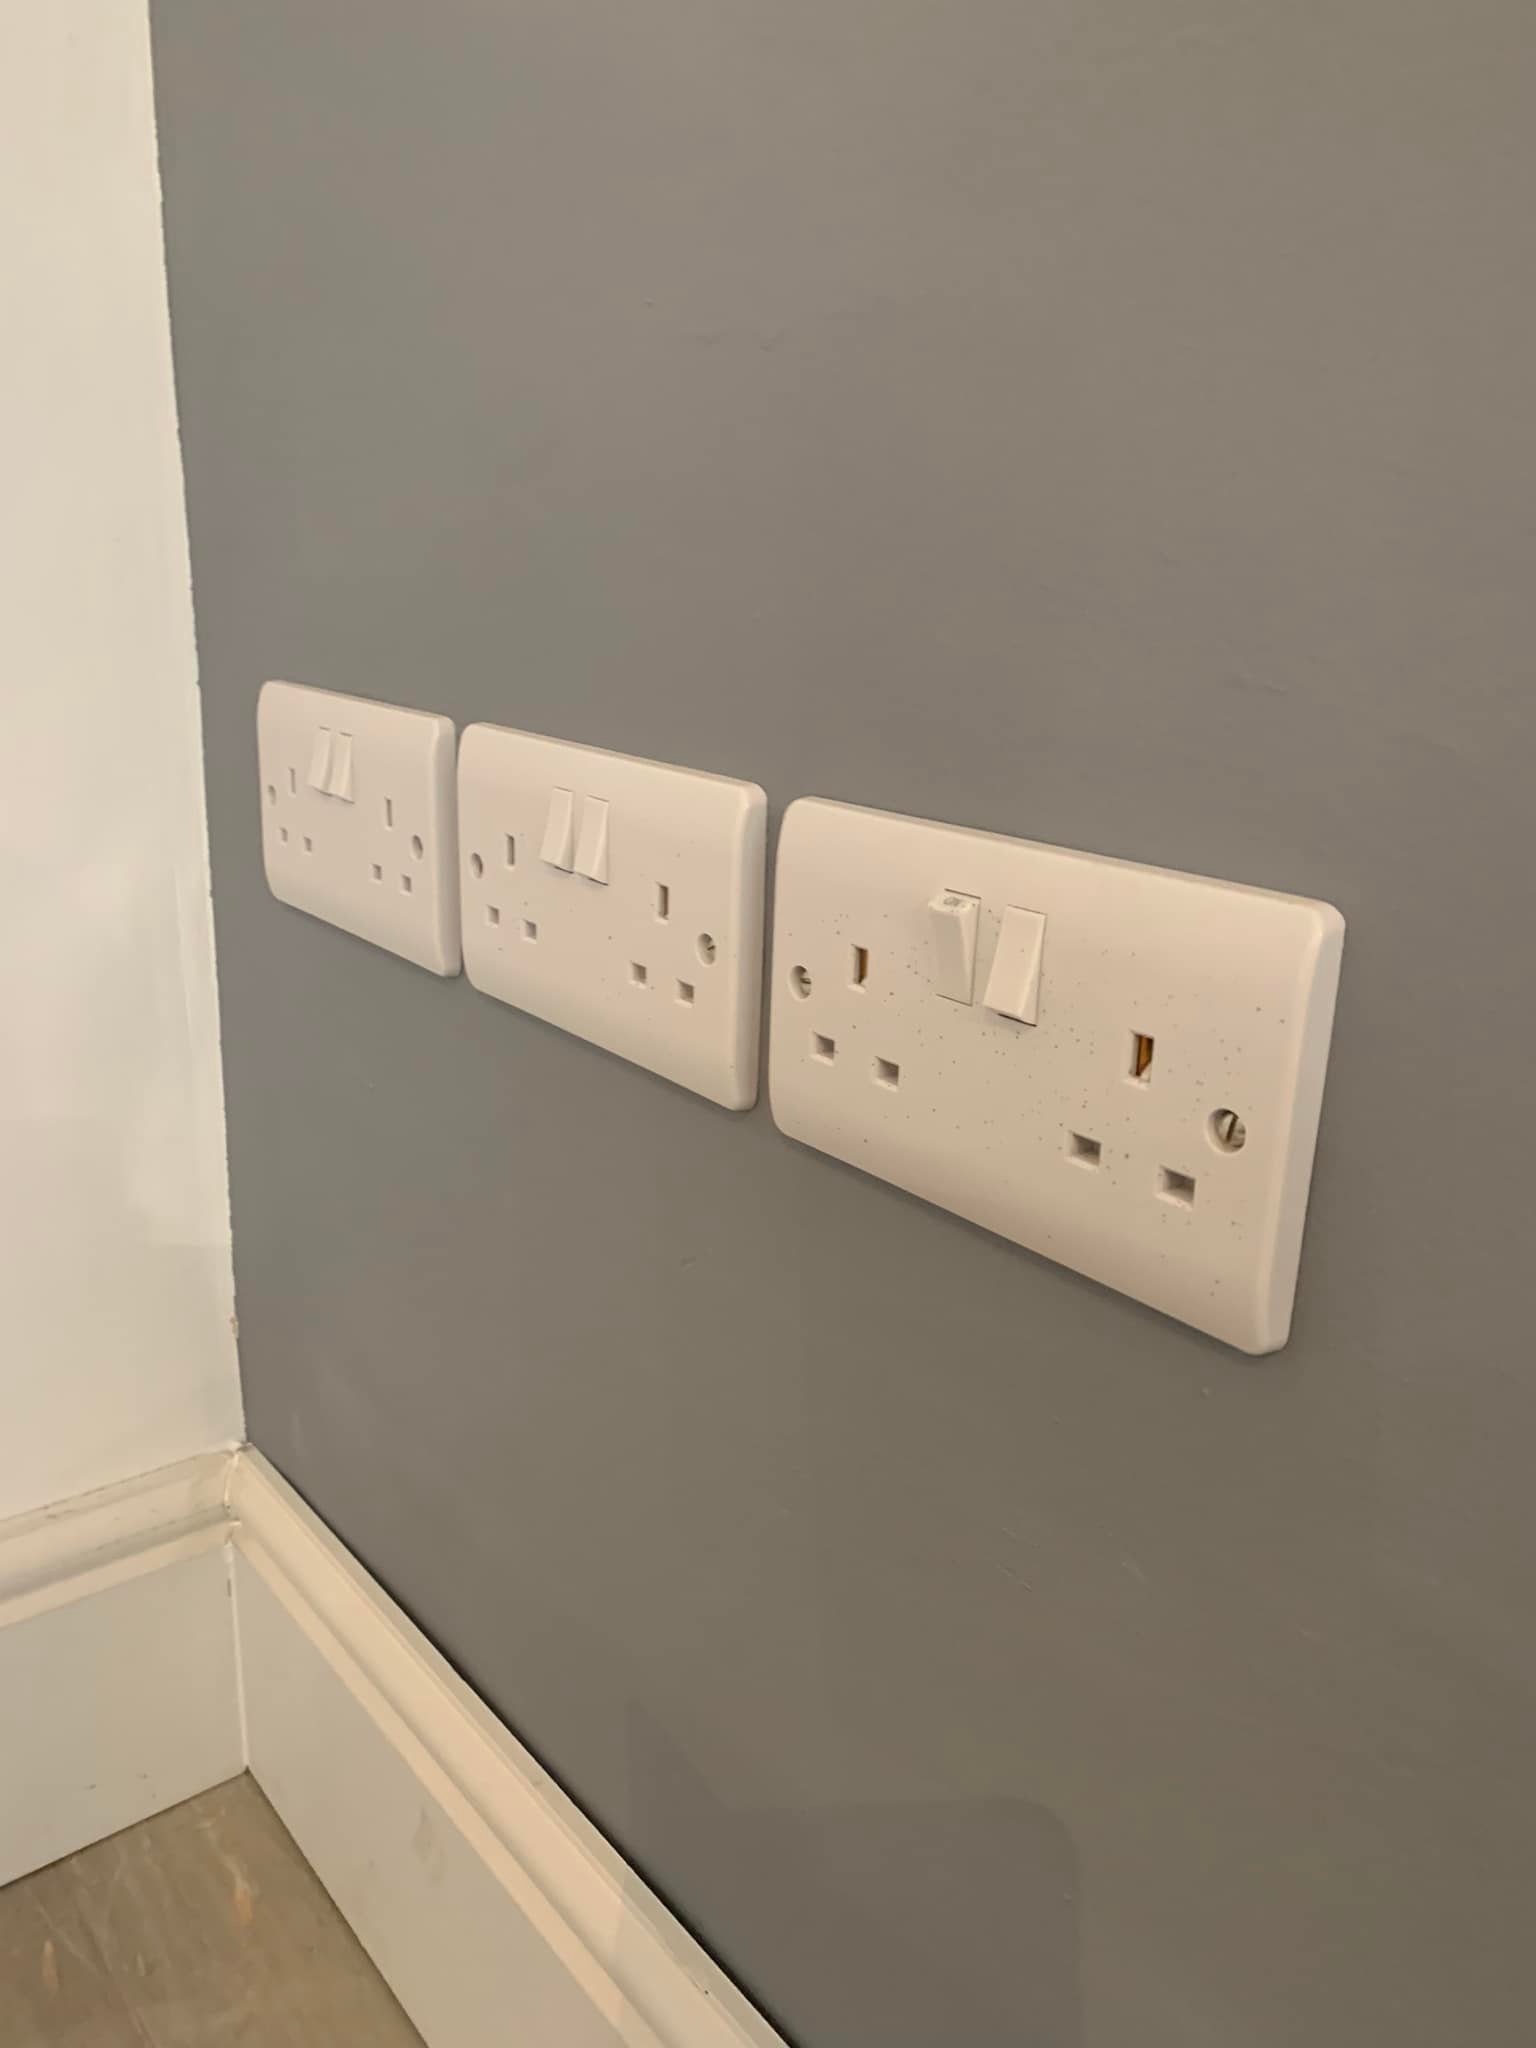 White sockets mounted on the wall near the skirting board